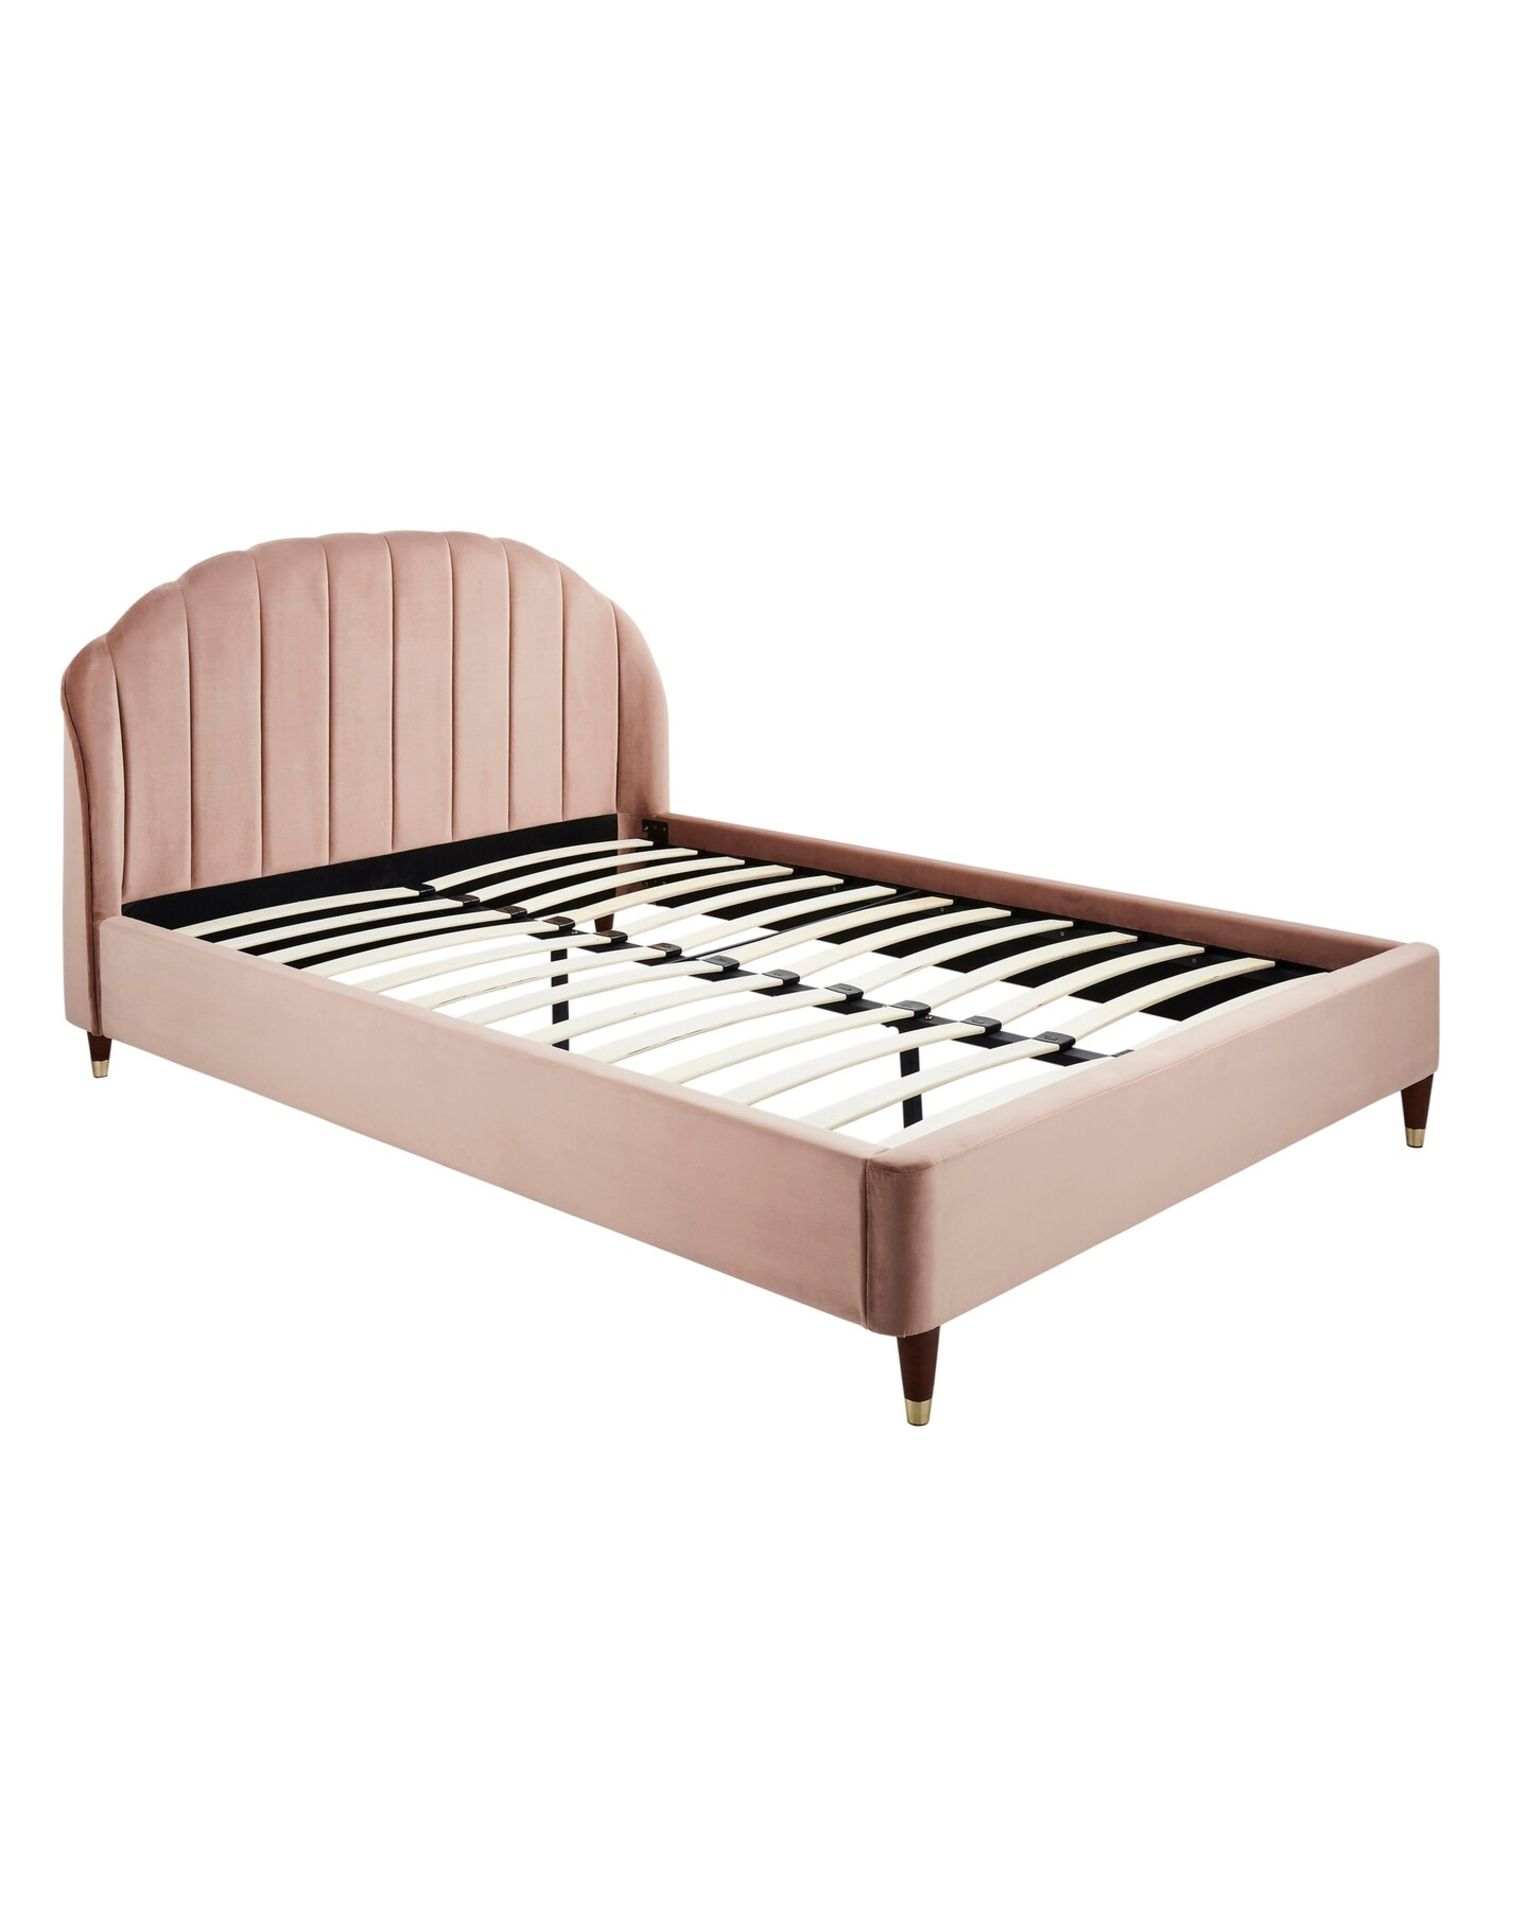 BRAND NEW CLARA Fabric DOUBLE Bed Frame. BLACK. RRP £419 EACH. The Clara fabric bed frame features a - Image 2 of 2